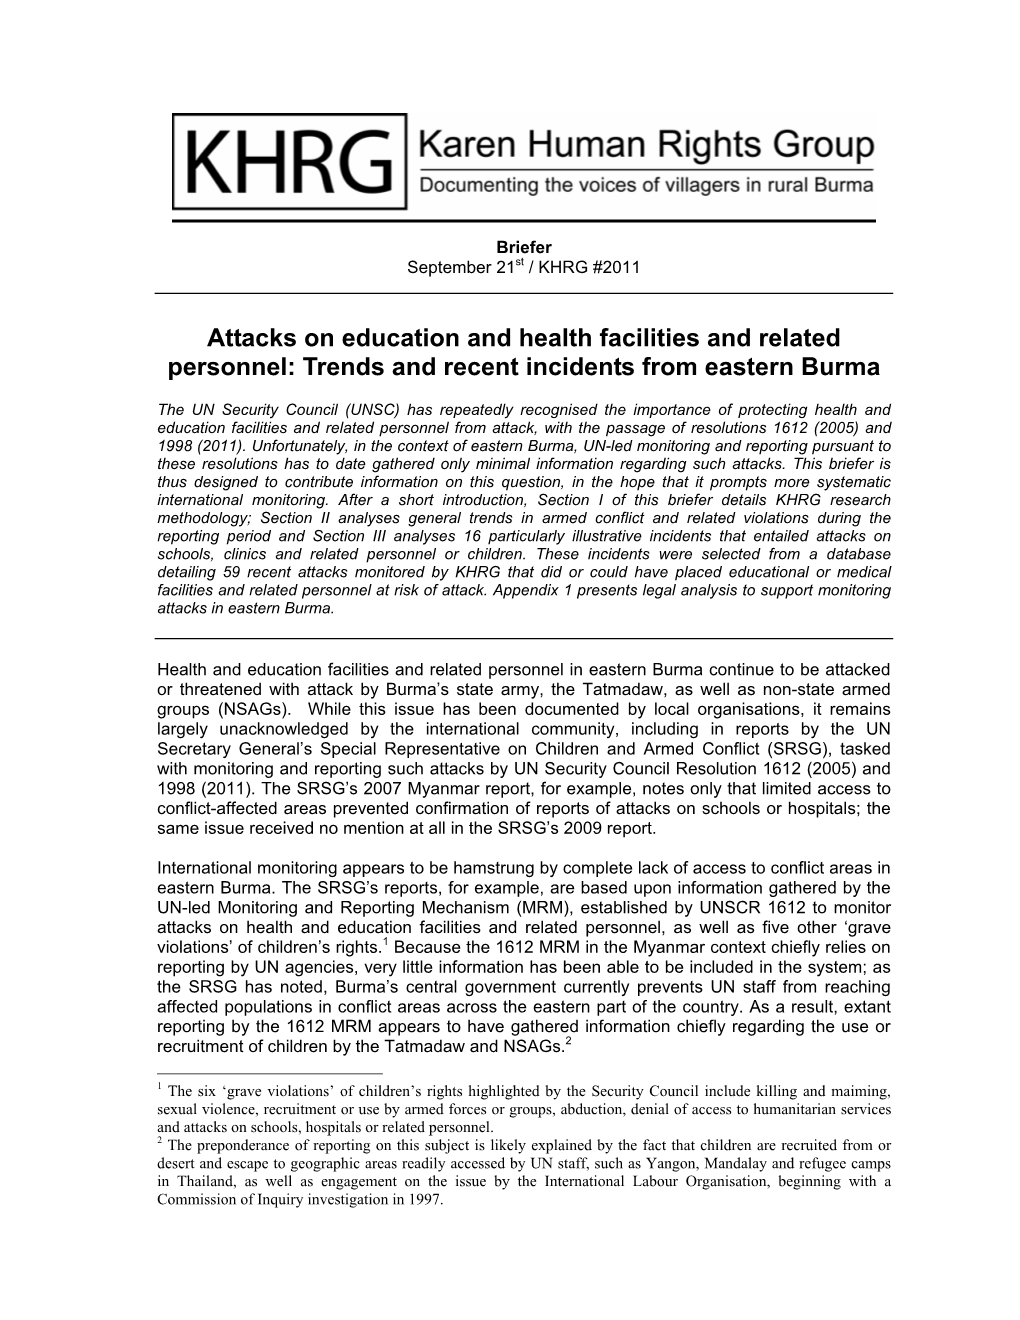 Attacks on Education and Health Facilities and Related Personnel: Trends and Recent Incidents from Eastern Burma